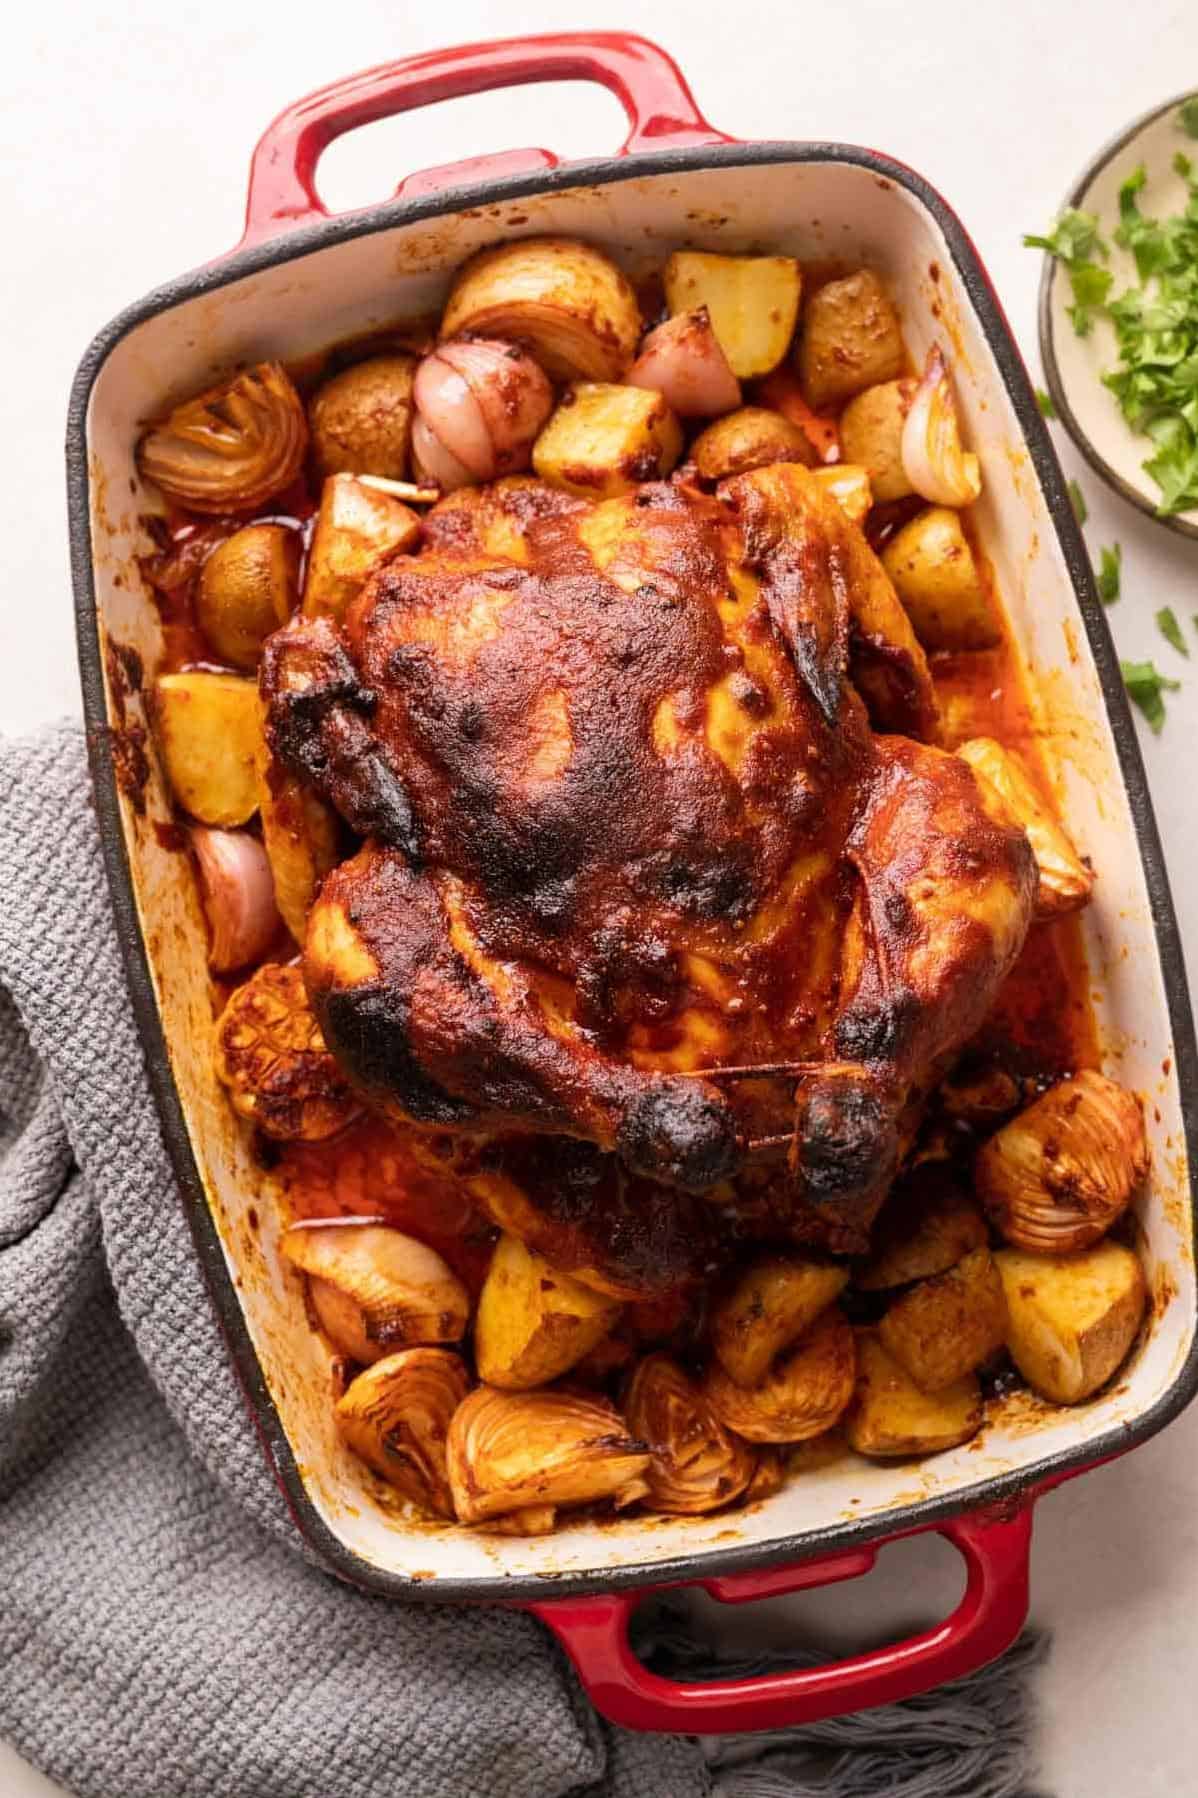  Tandoori flavors shine in this deliciously spiced rotisserie chicken.